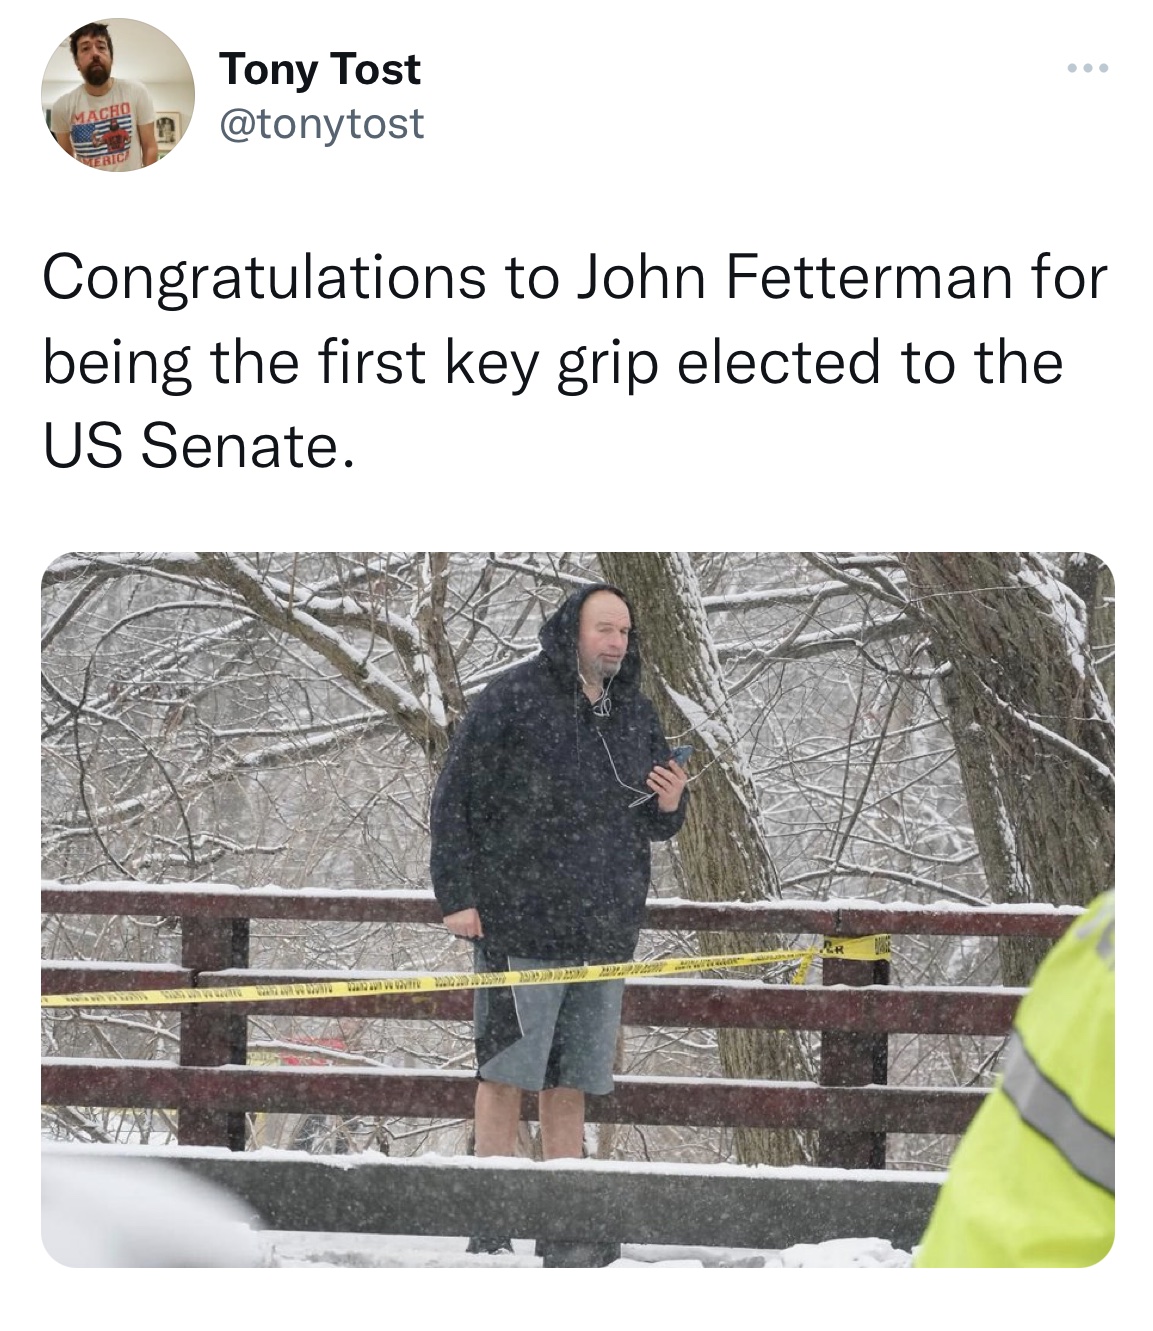 winter - Tony Tost Congratulations to John Fetterman for being the first key grip elected to the Us Senate.